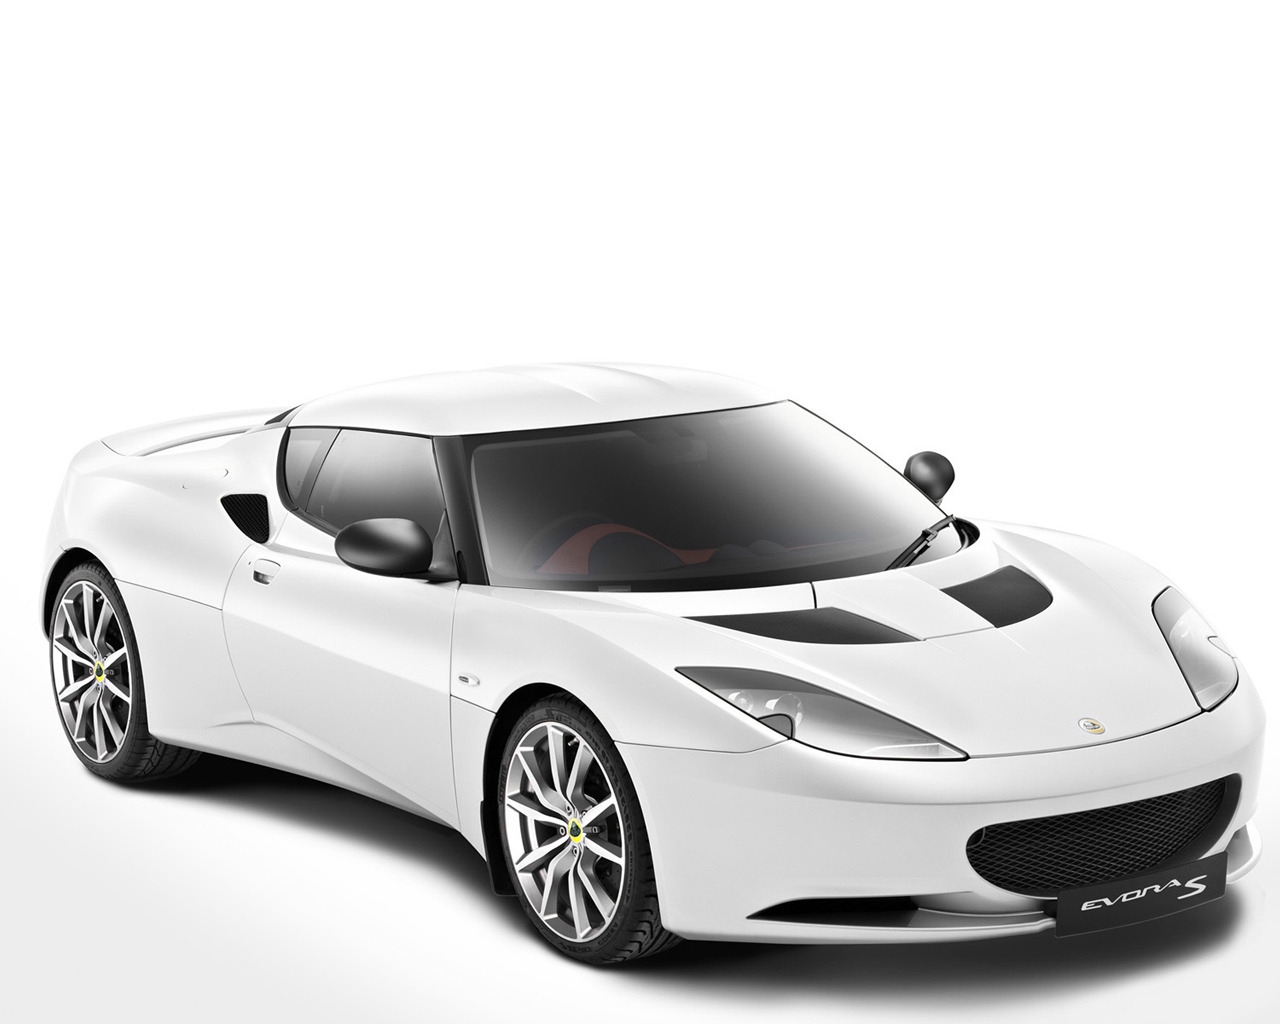 Lotus Evora S 2011 Front Angle for 1280 x 1024 resolution